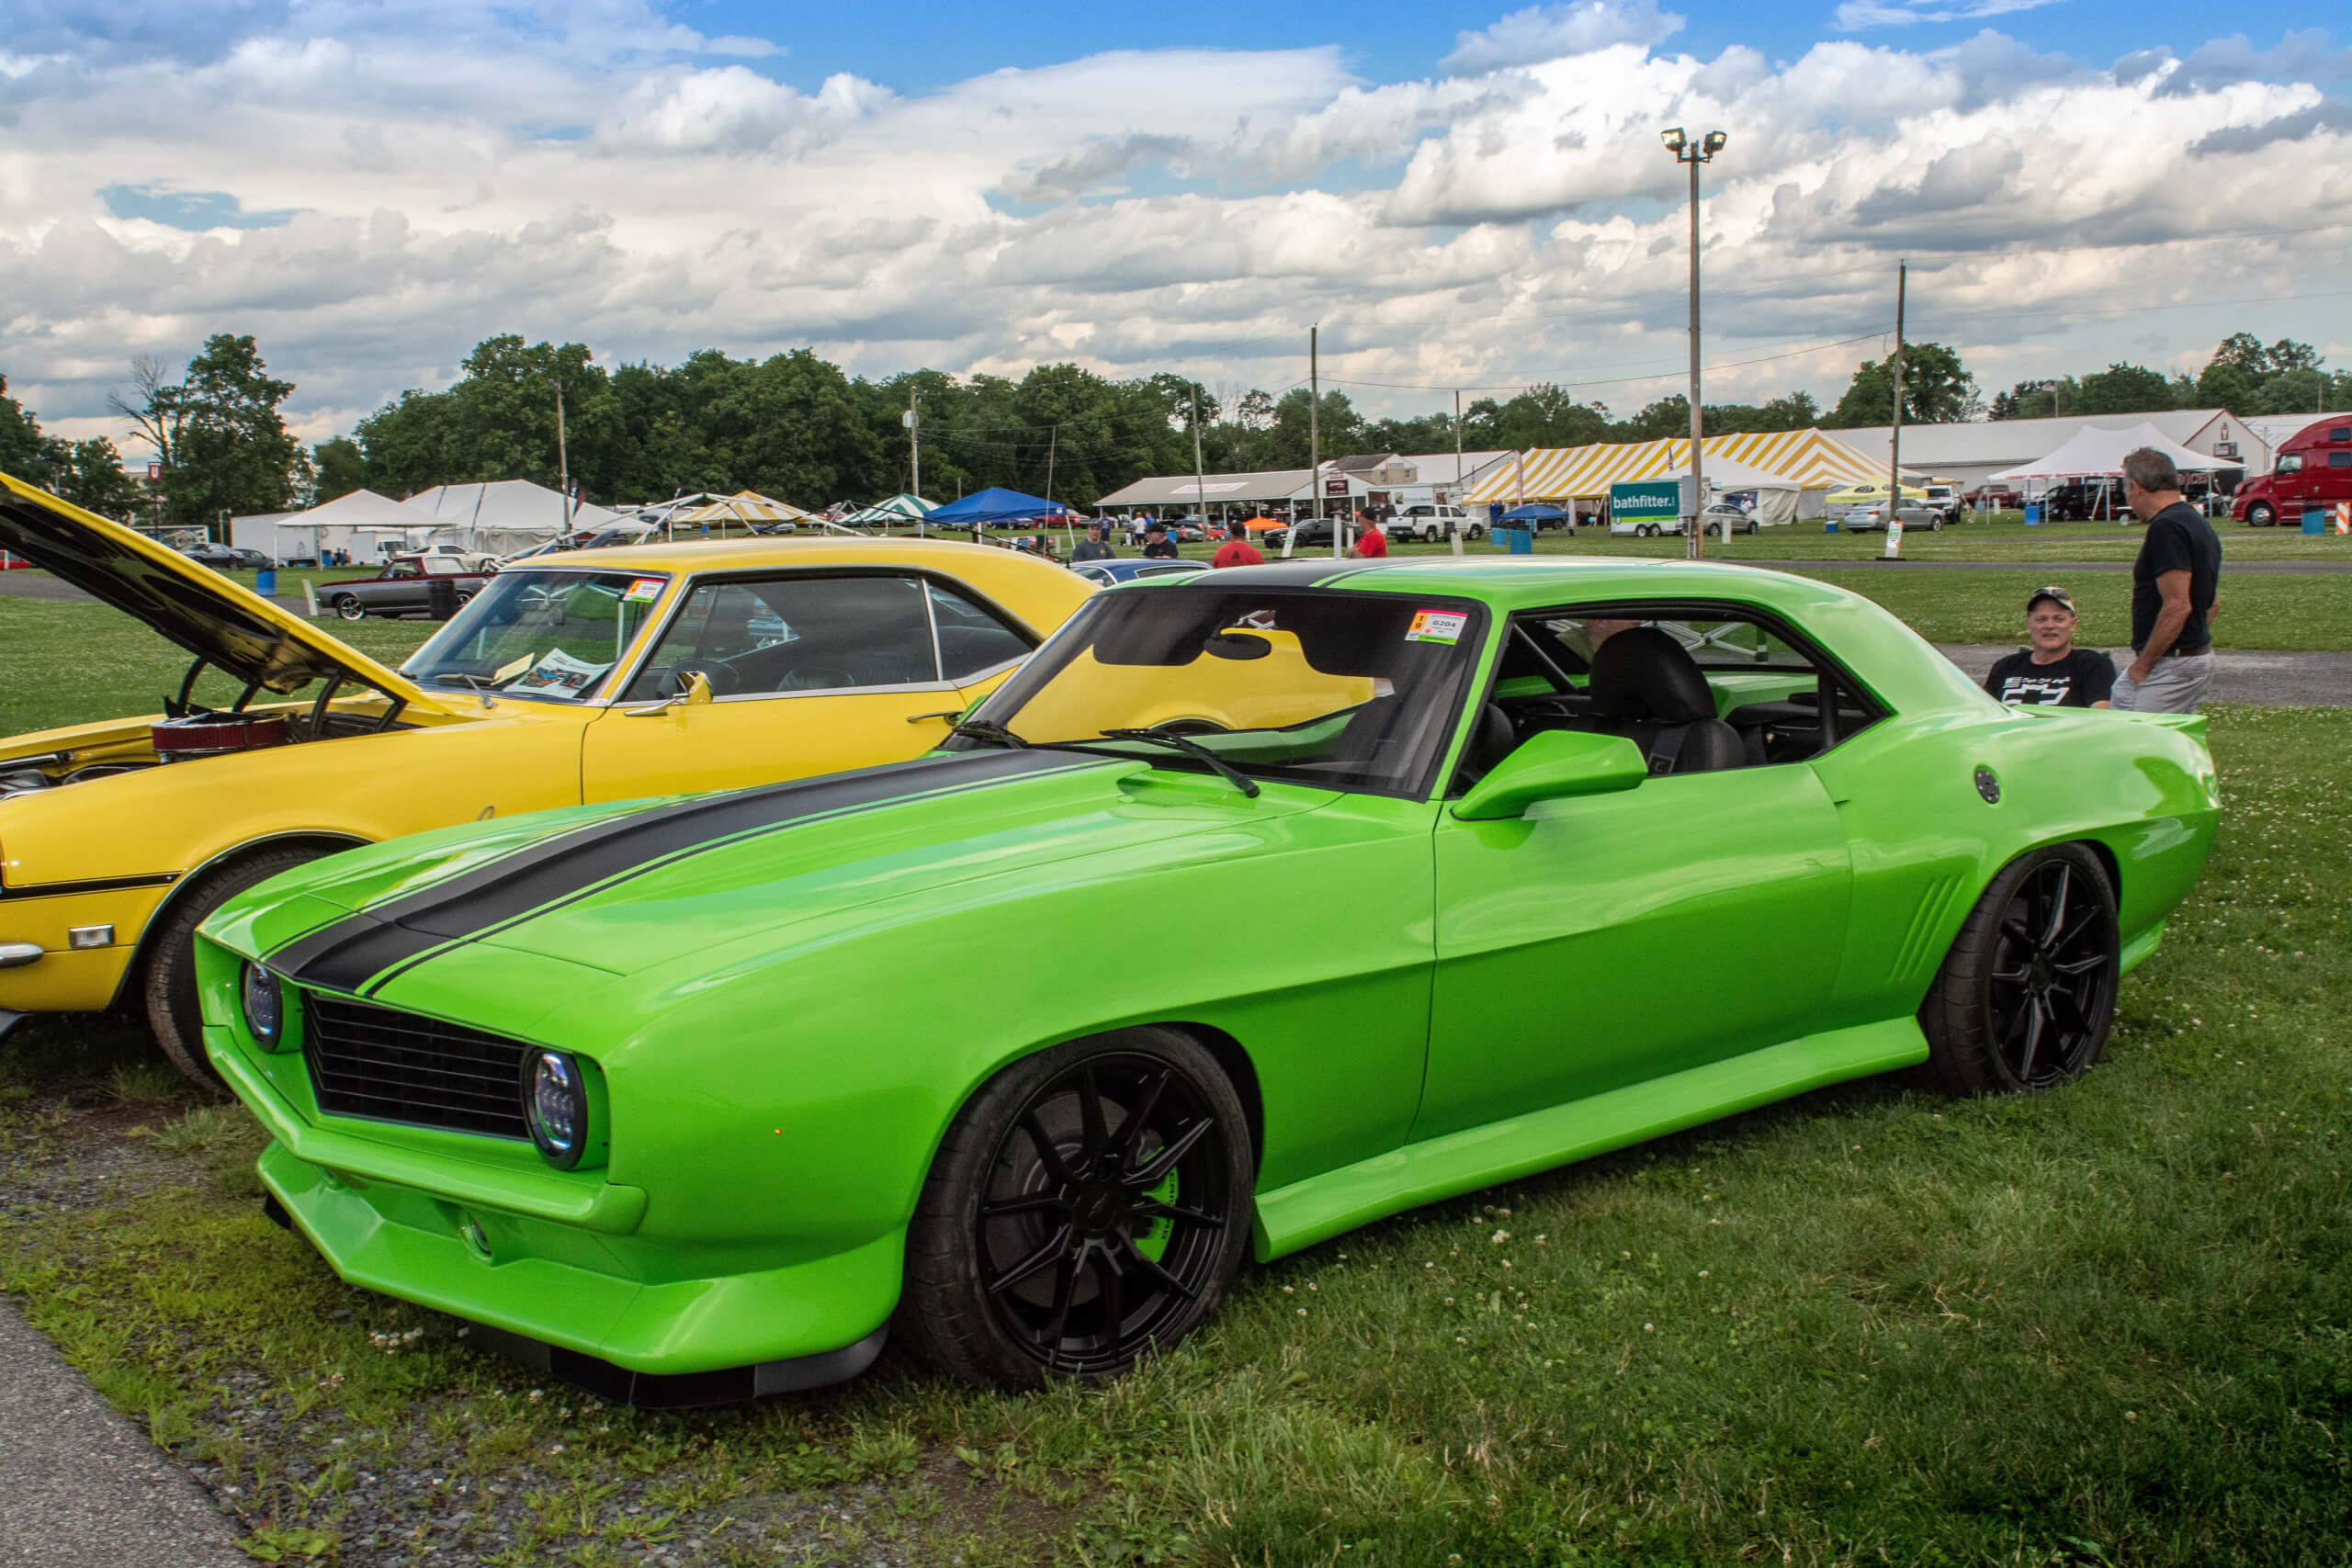 This is the fourth custom 1969 Camaro Pernell Spohn has built. He combined a 1969 Camaro with a 2008 Corvette.